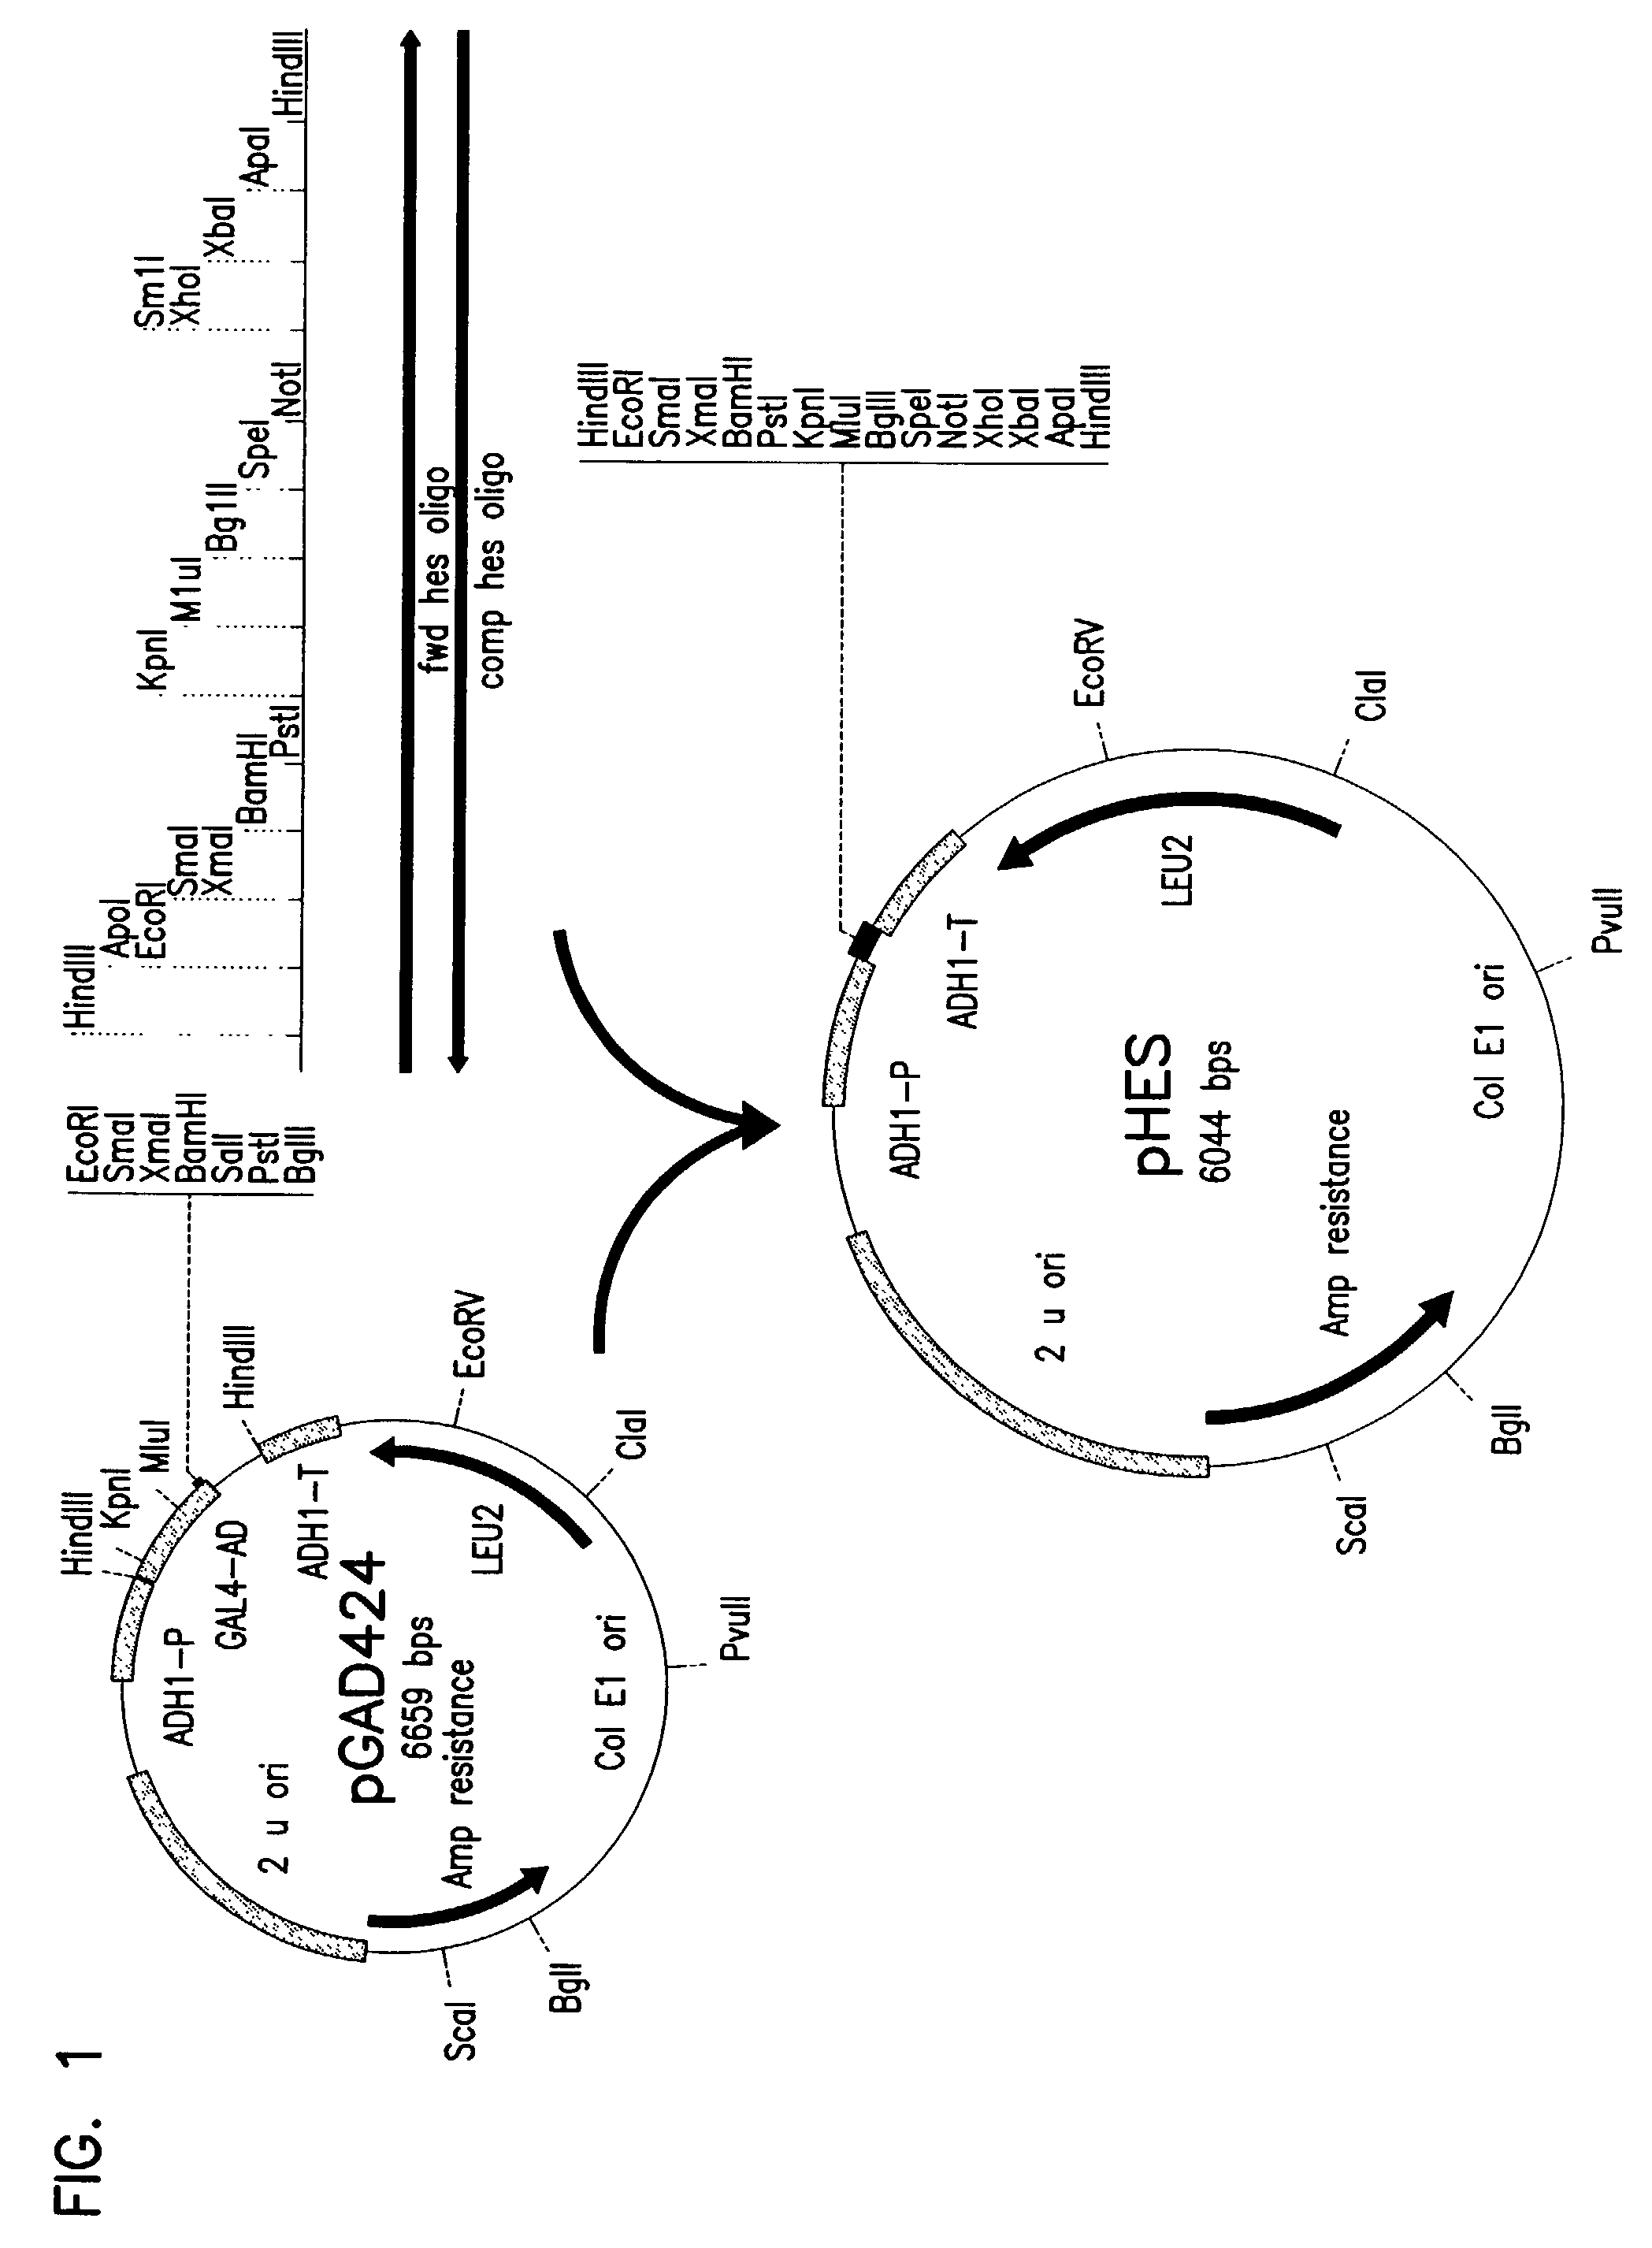 Methods for the synthesis of lactic acid using crabtree-negative yeast transformed with the lactate dehydrogenase gene